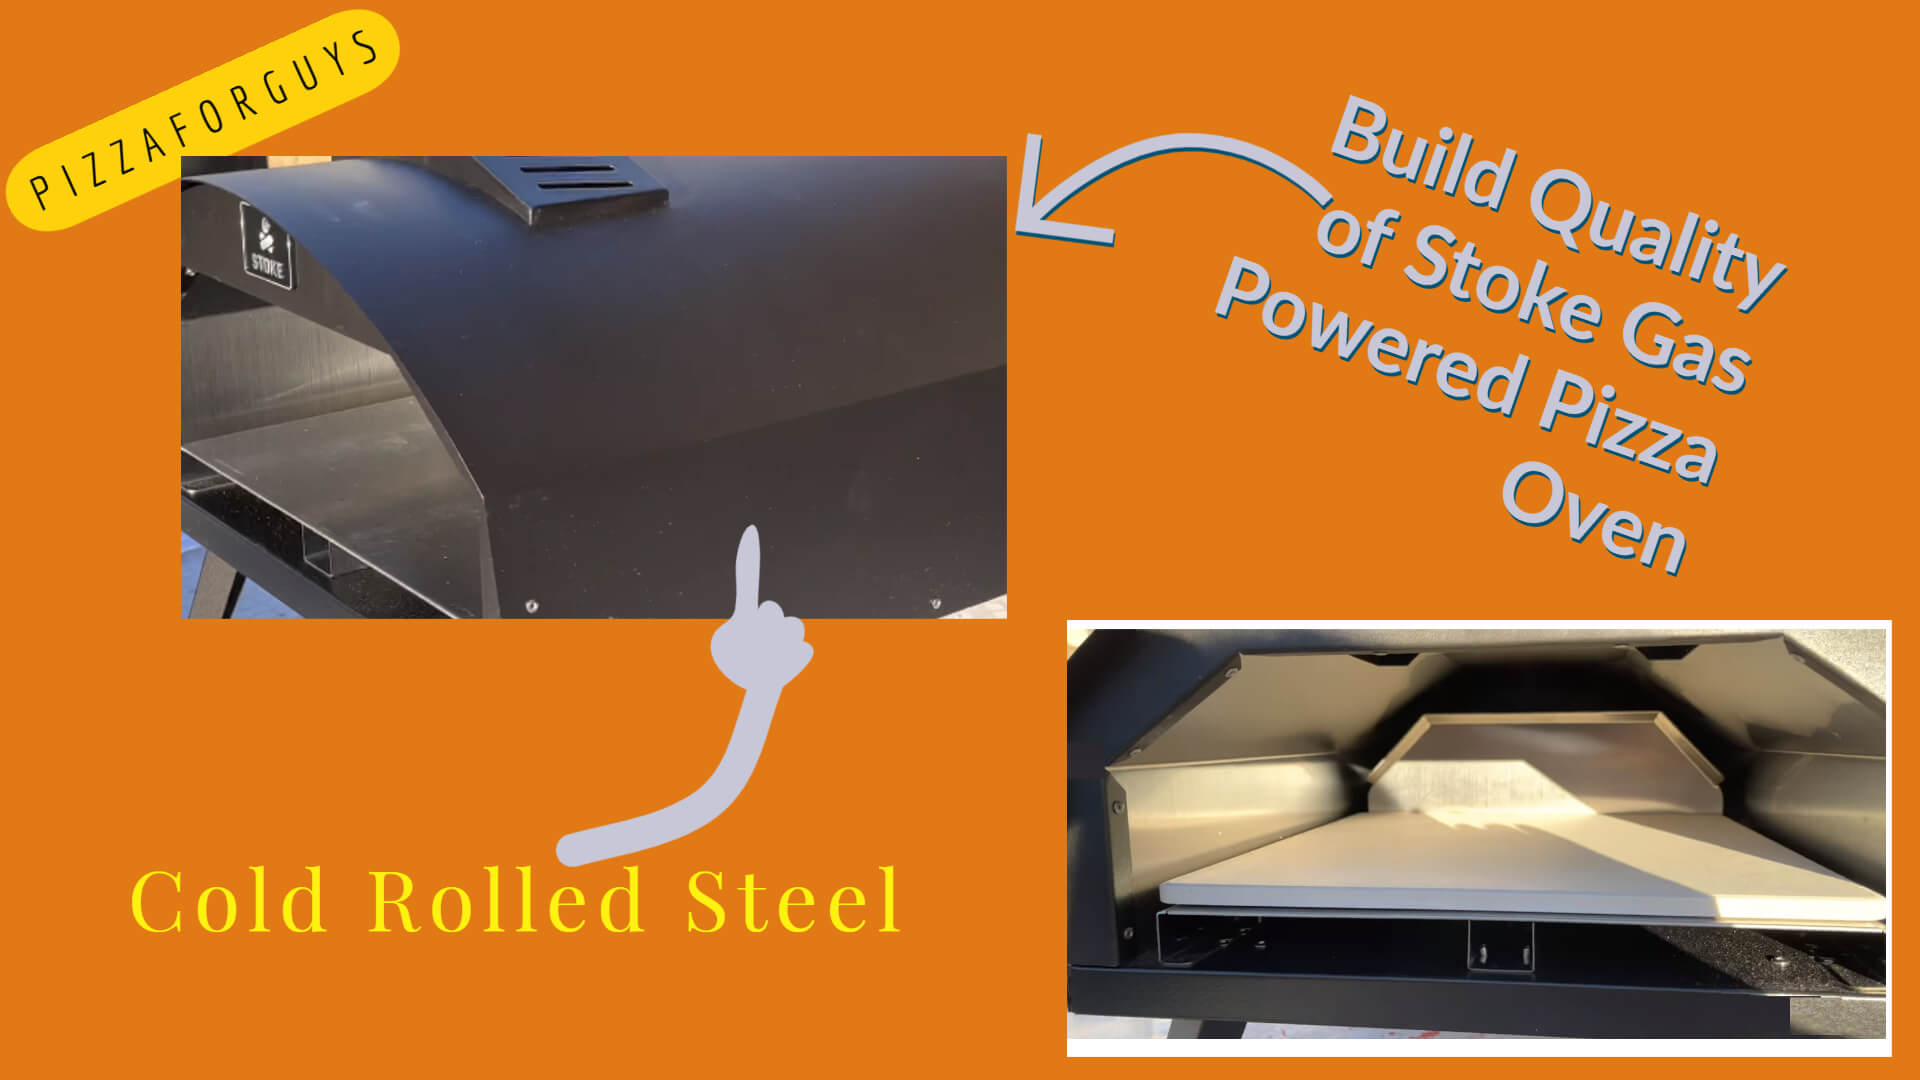 Build quality of stoke gas powered pizza oven